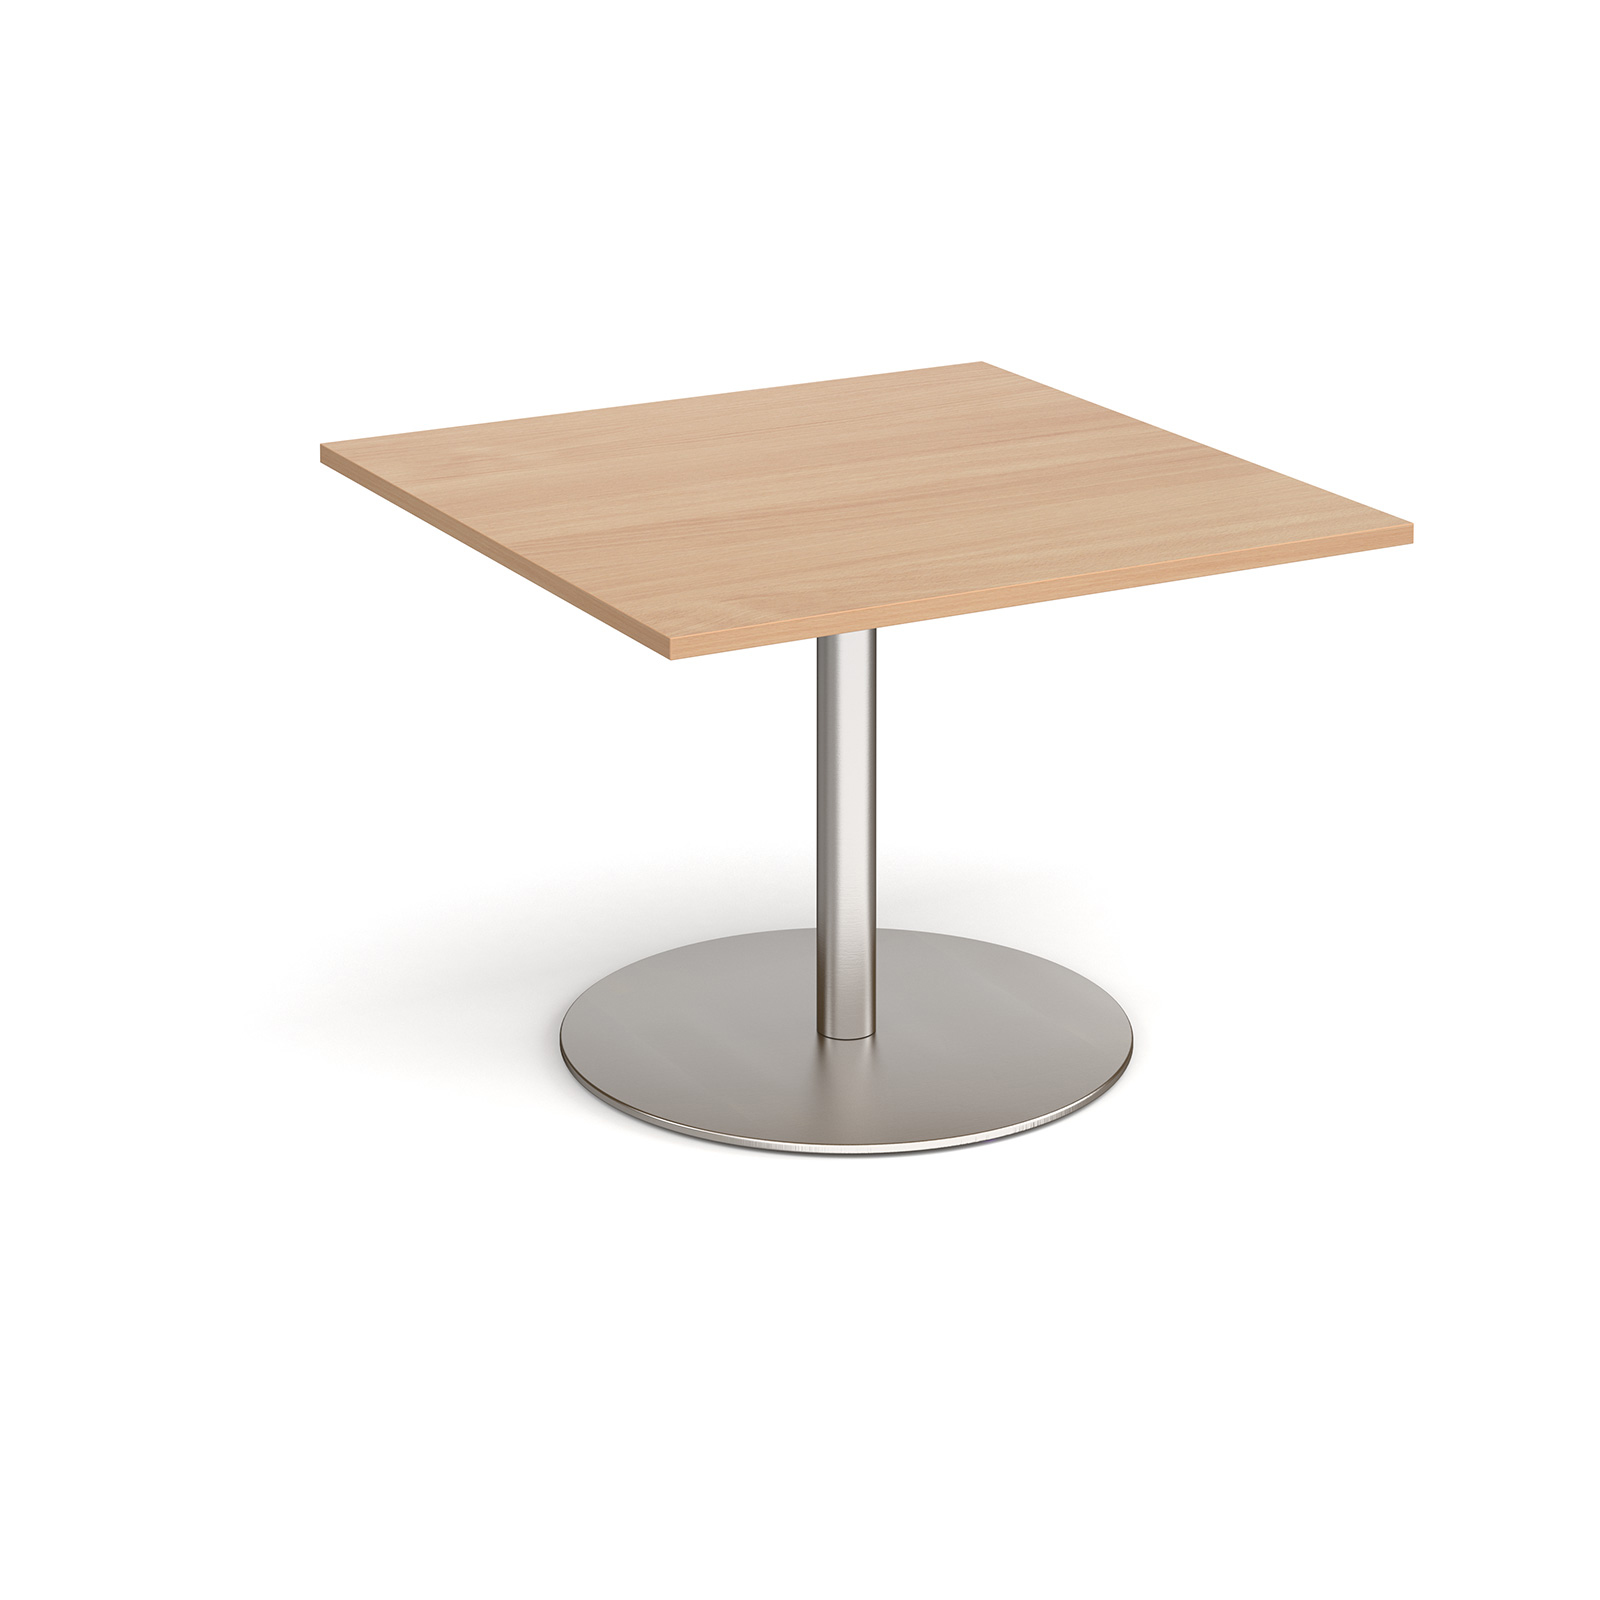 Eternal square extension table 1000mm x 1000mm - brushed steel base, beech top